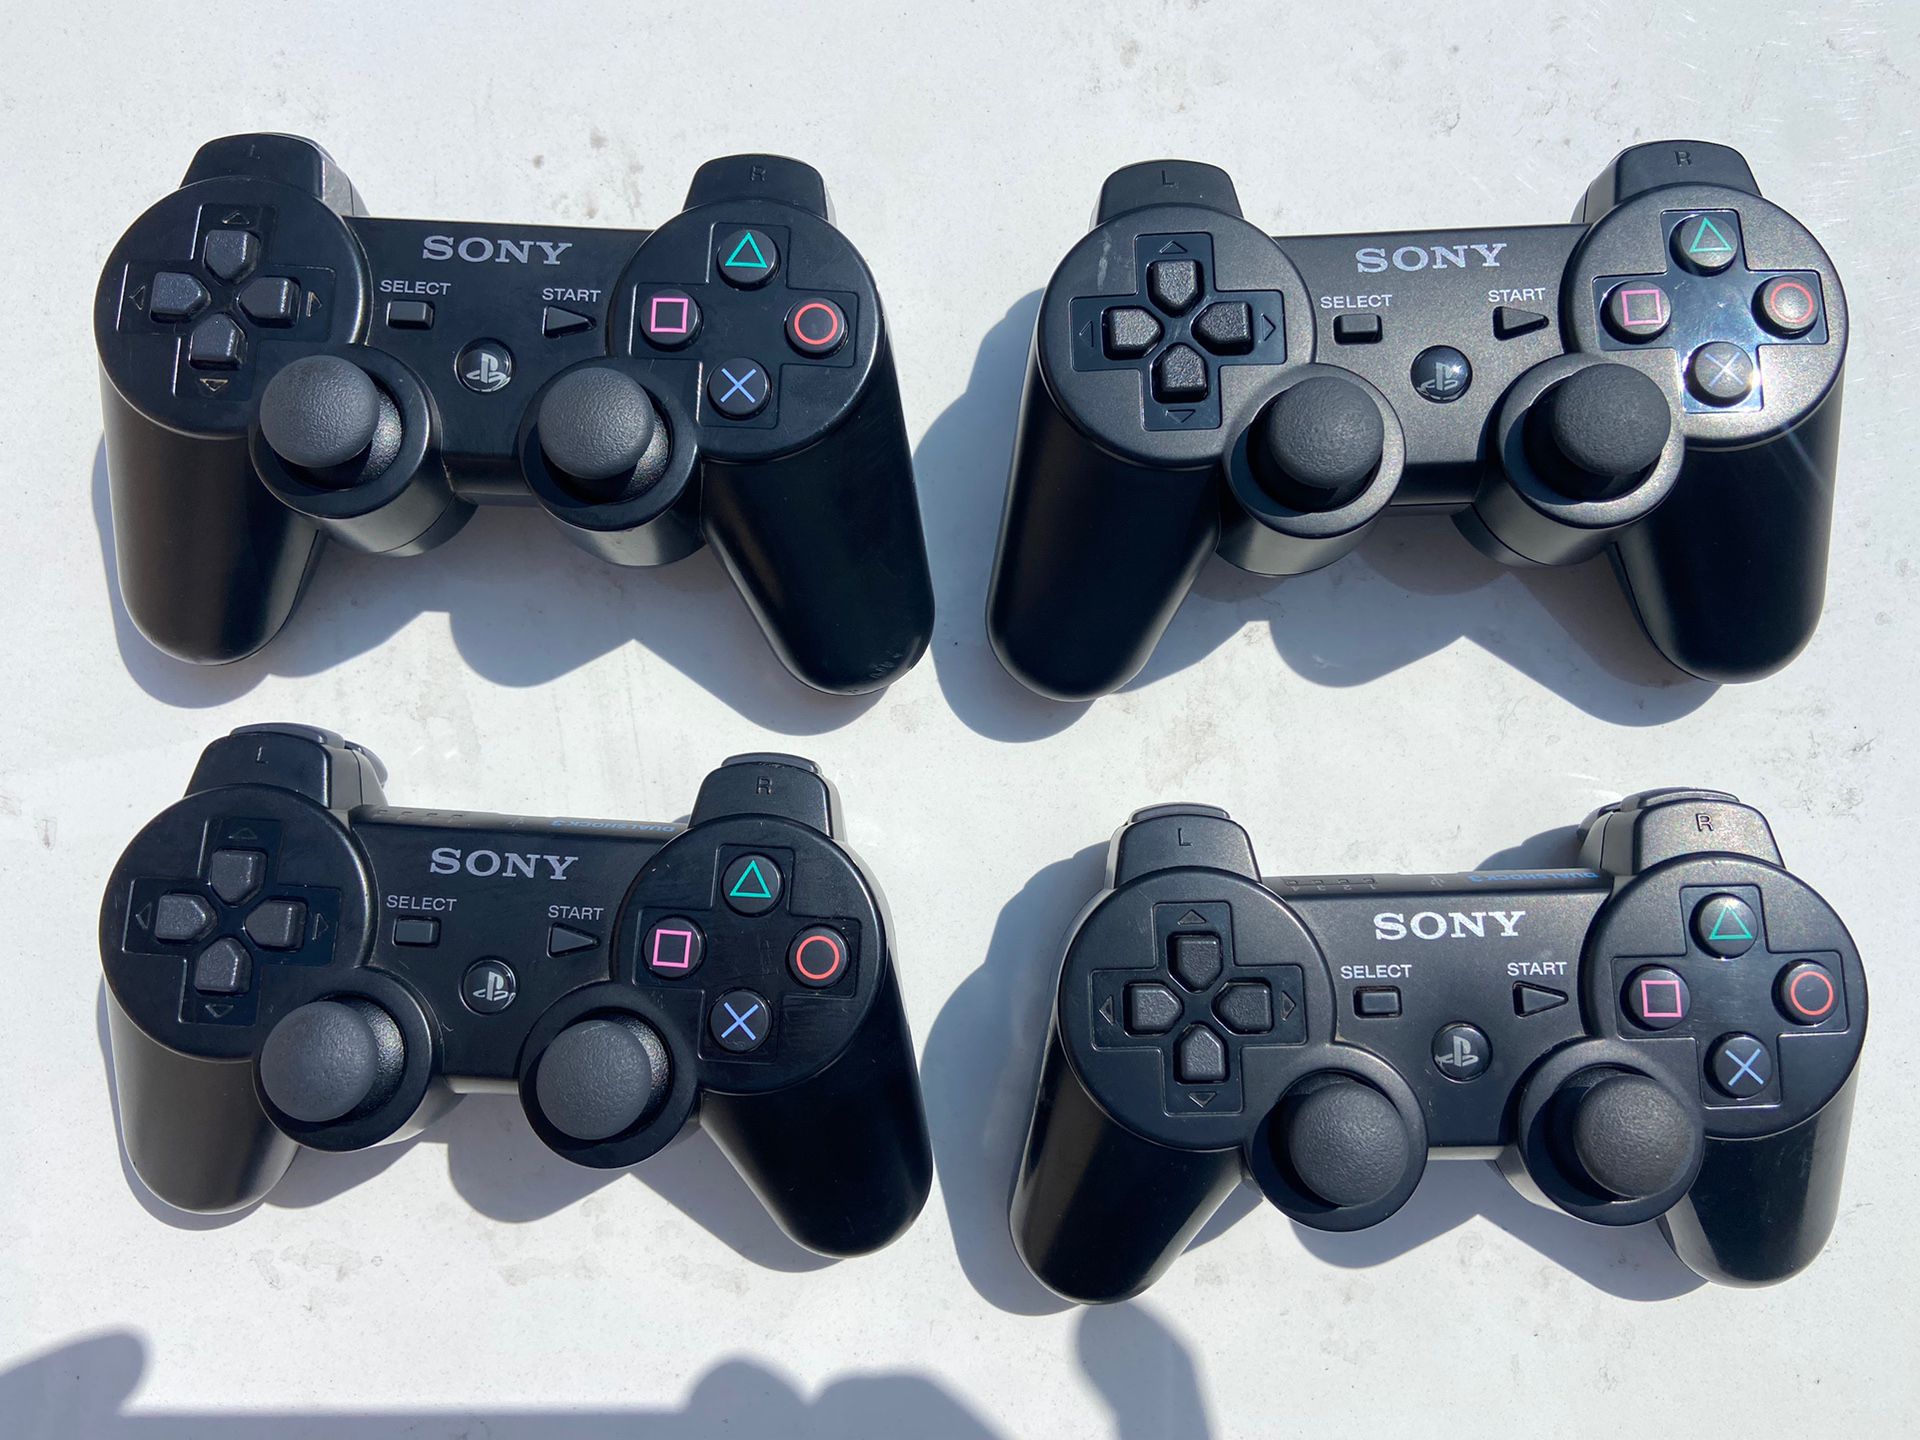 Ps3 Controllers